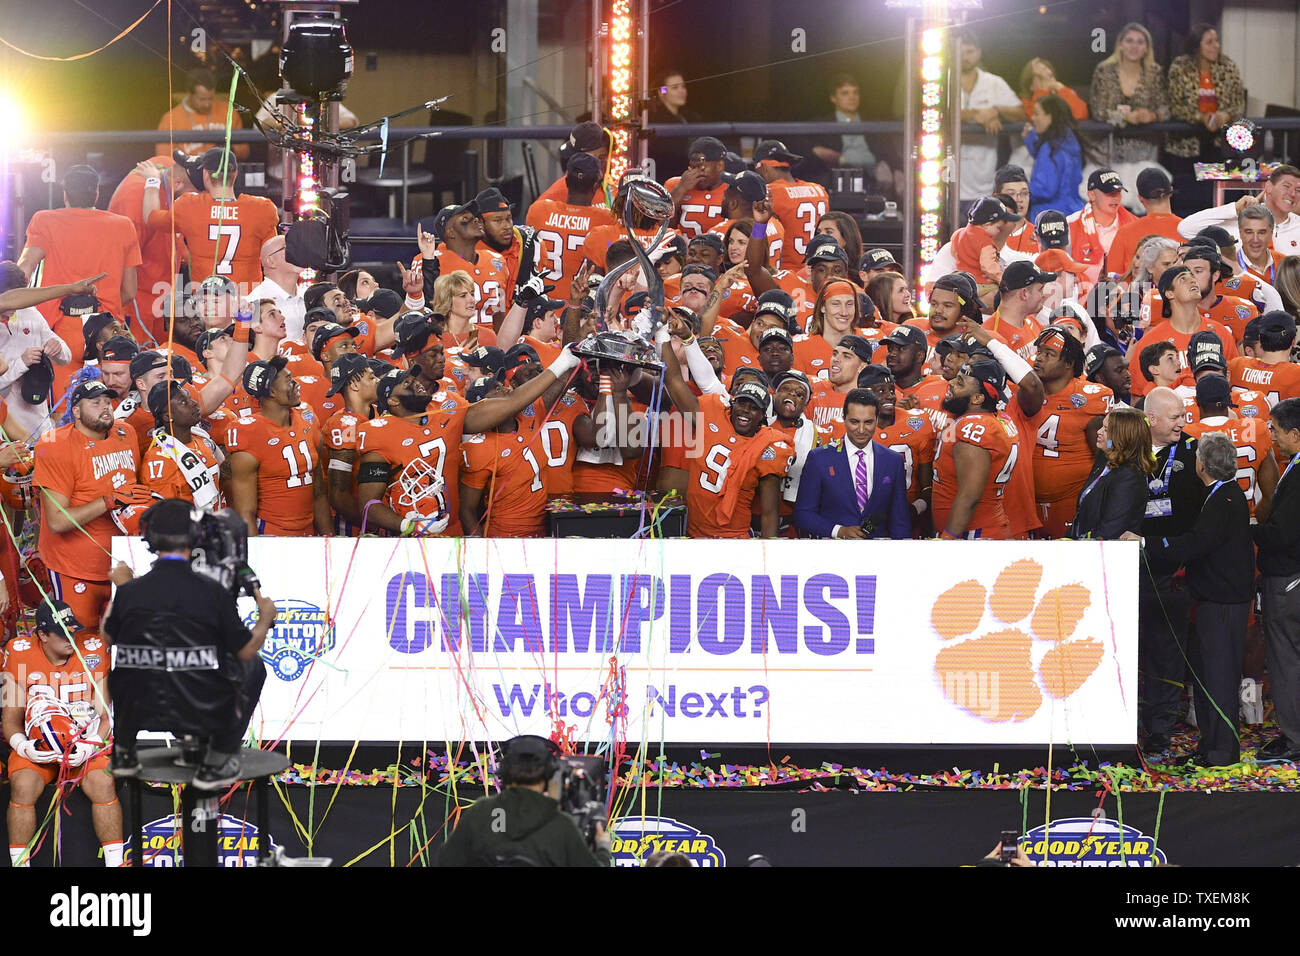 The Clemson Tigers hoist the Field Scovell Trophy after defeating the Notre Dame Fighting Irish during the College Football Playoff Semifinal at the Goodyear Cotton Bowl Classic at AT&T Stadium in Arlington, Texas on December 29, 2018. The Tigers won 30-3 and will face the winner of the CFP Semifinal at the Capital One Orange Bowl in the National Championship Game on January 7, 2019. Photo by Shane Roper/UPI Stock Photo